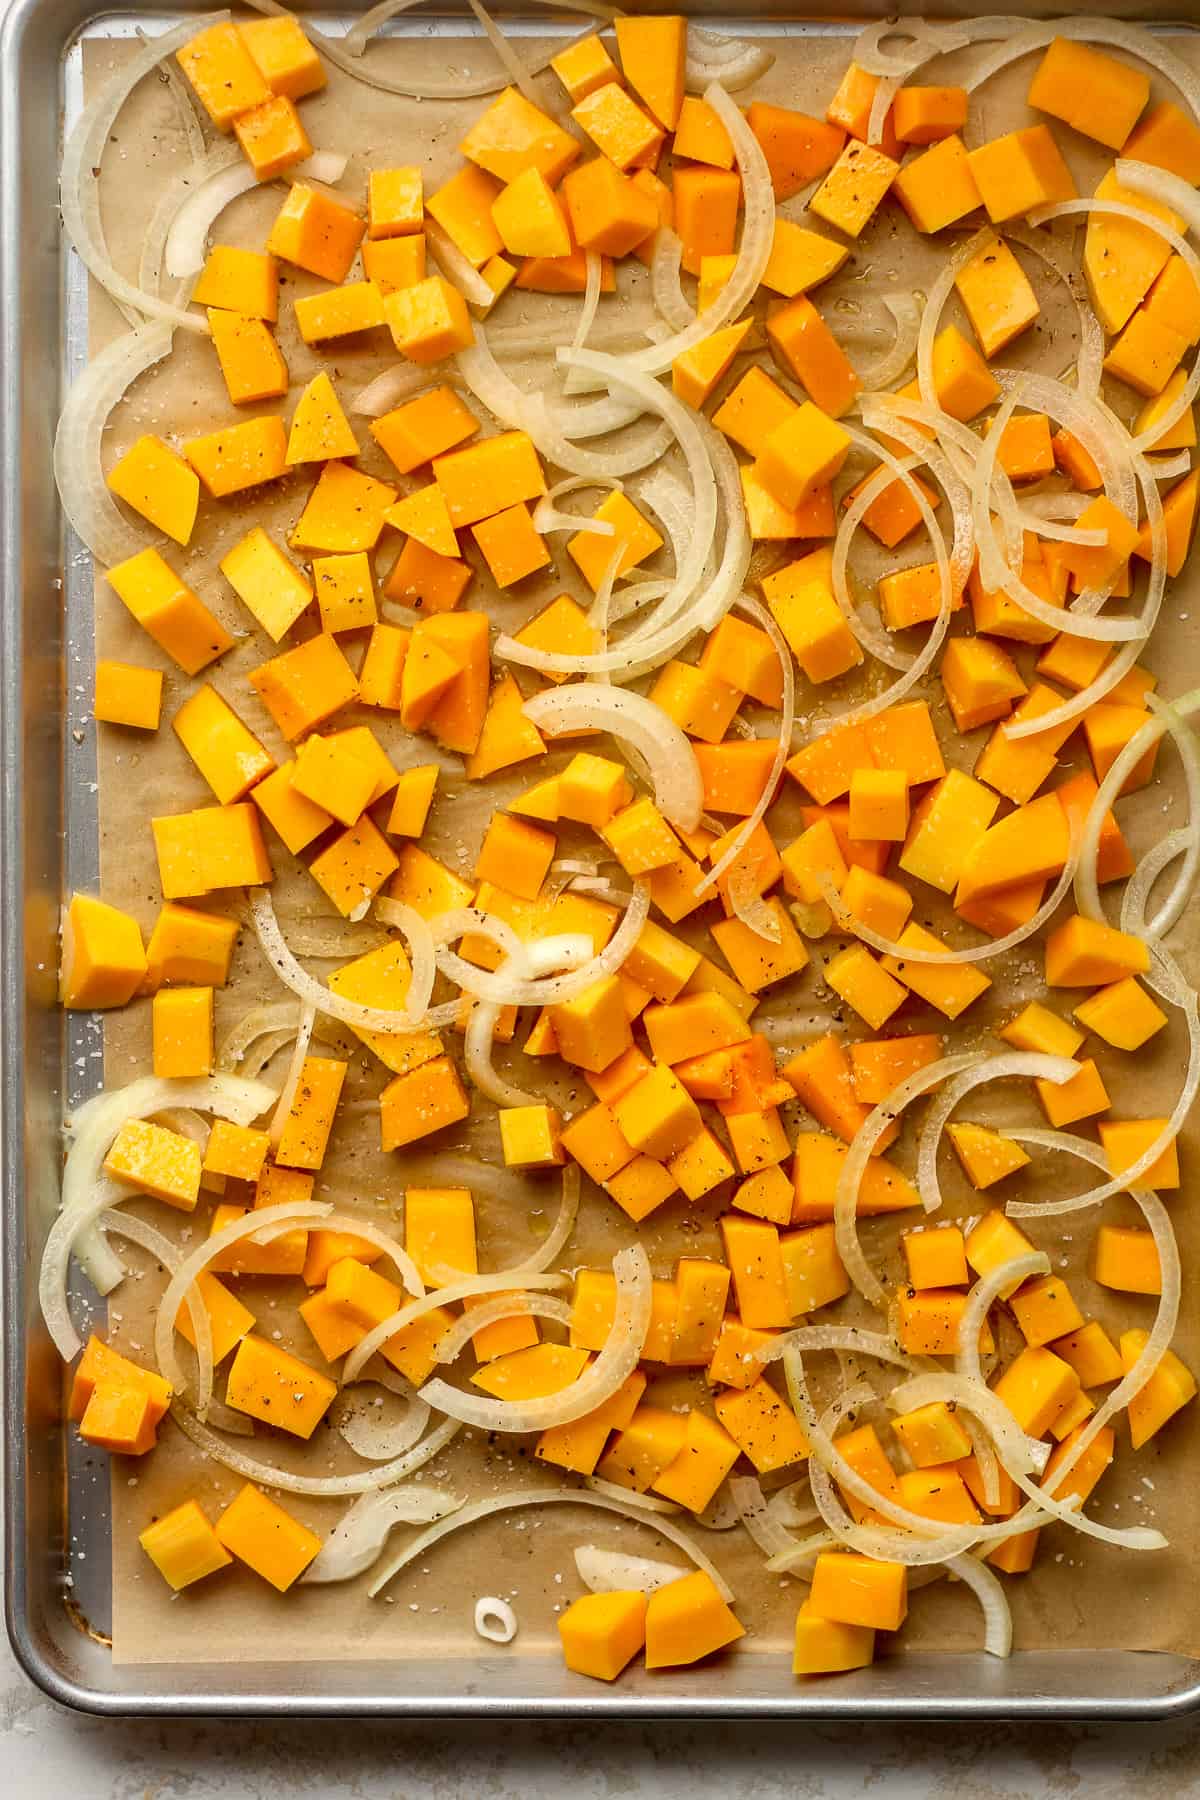 A pan of the cubed butternut squash and sliced onion.